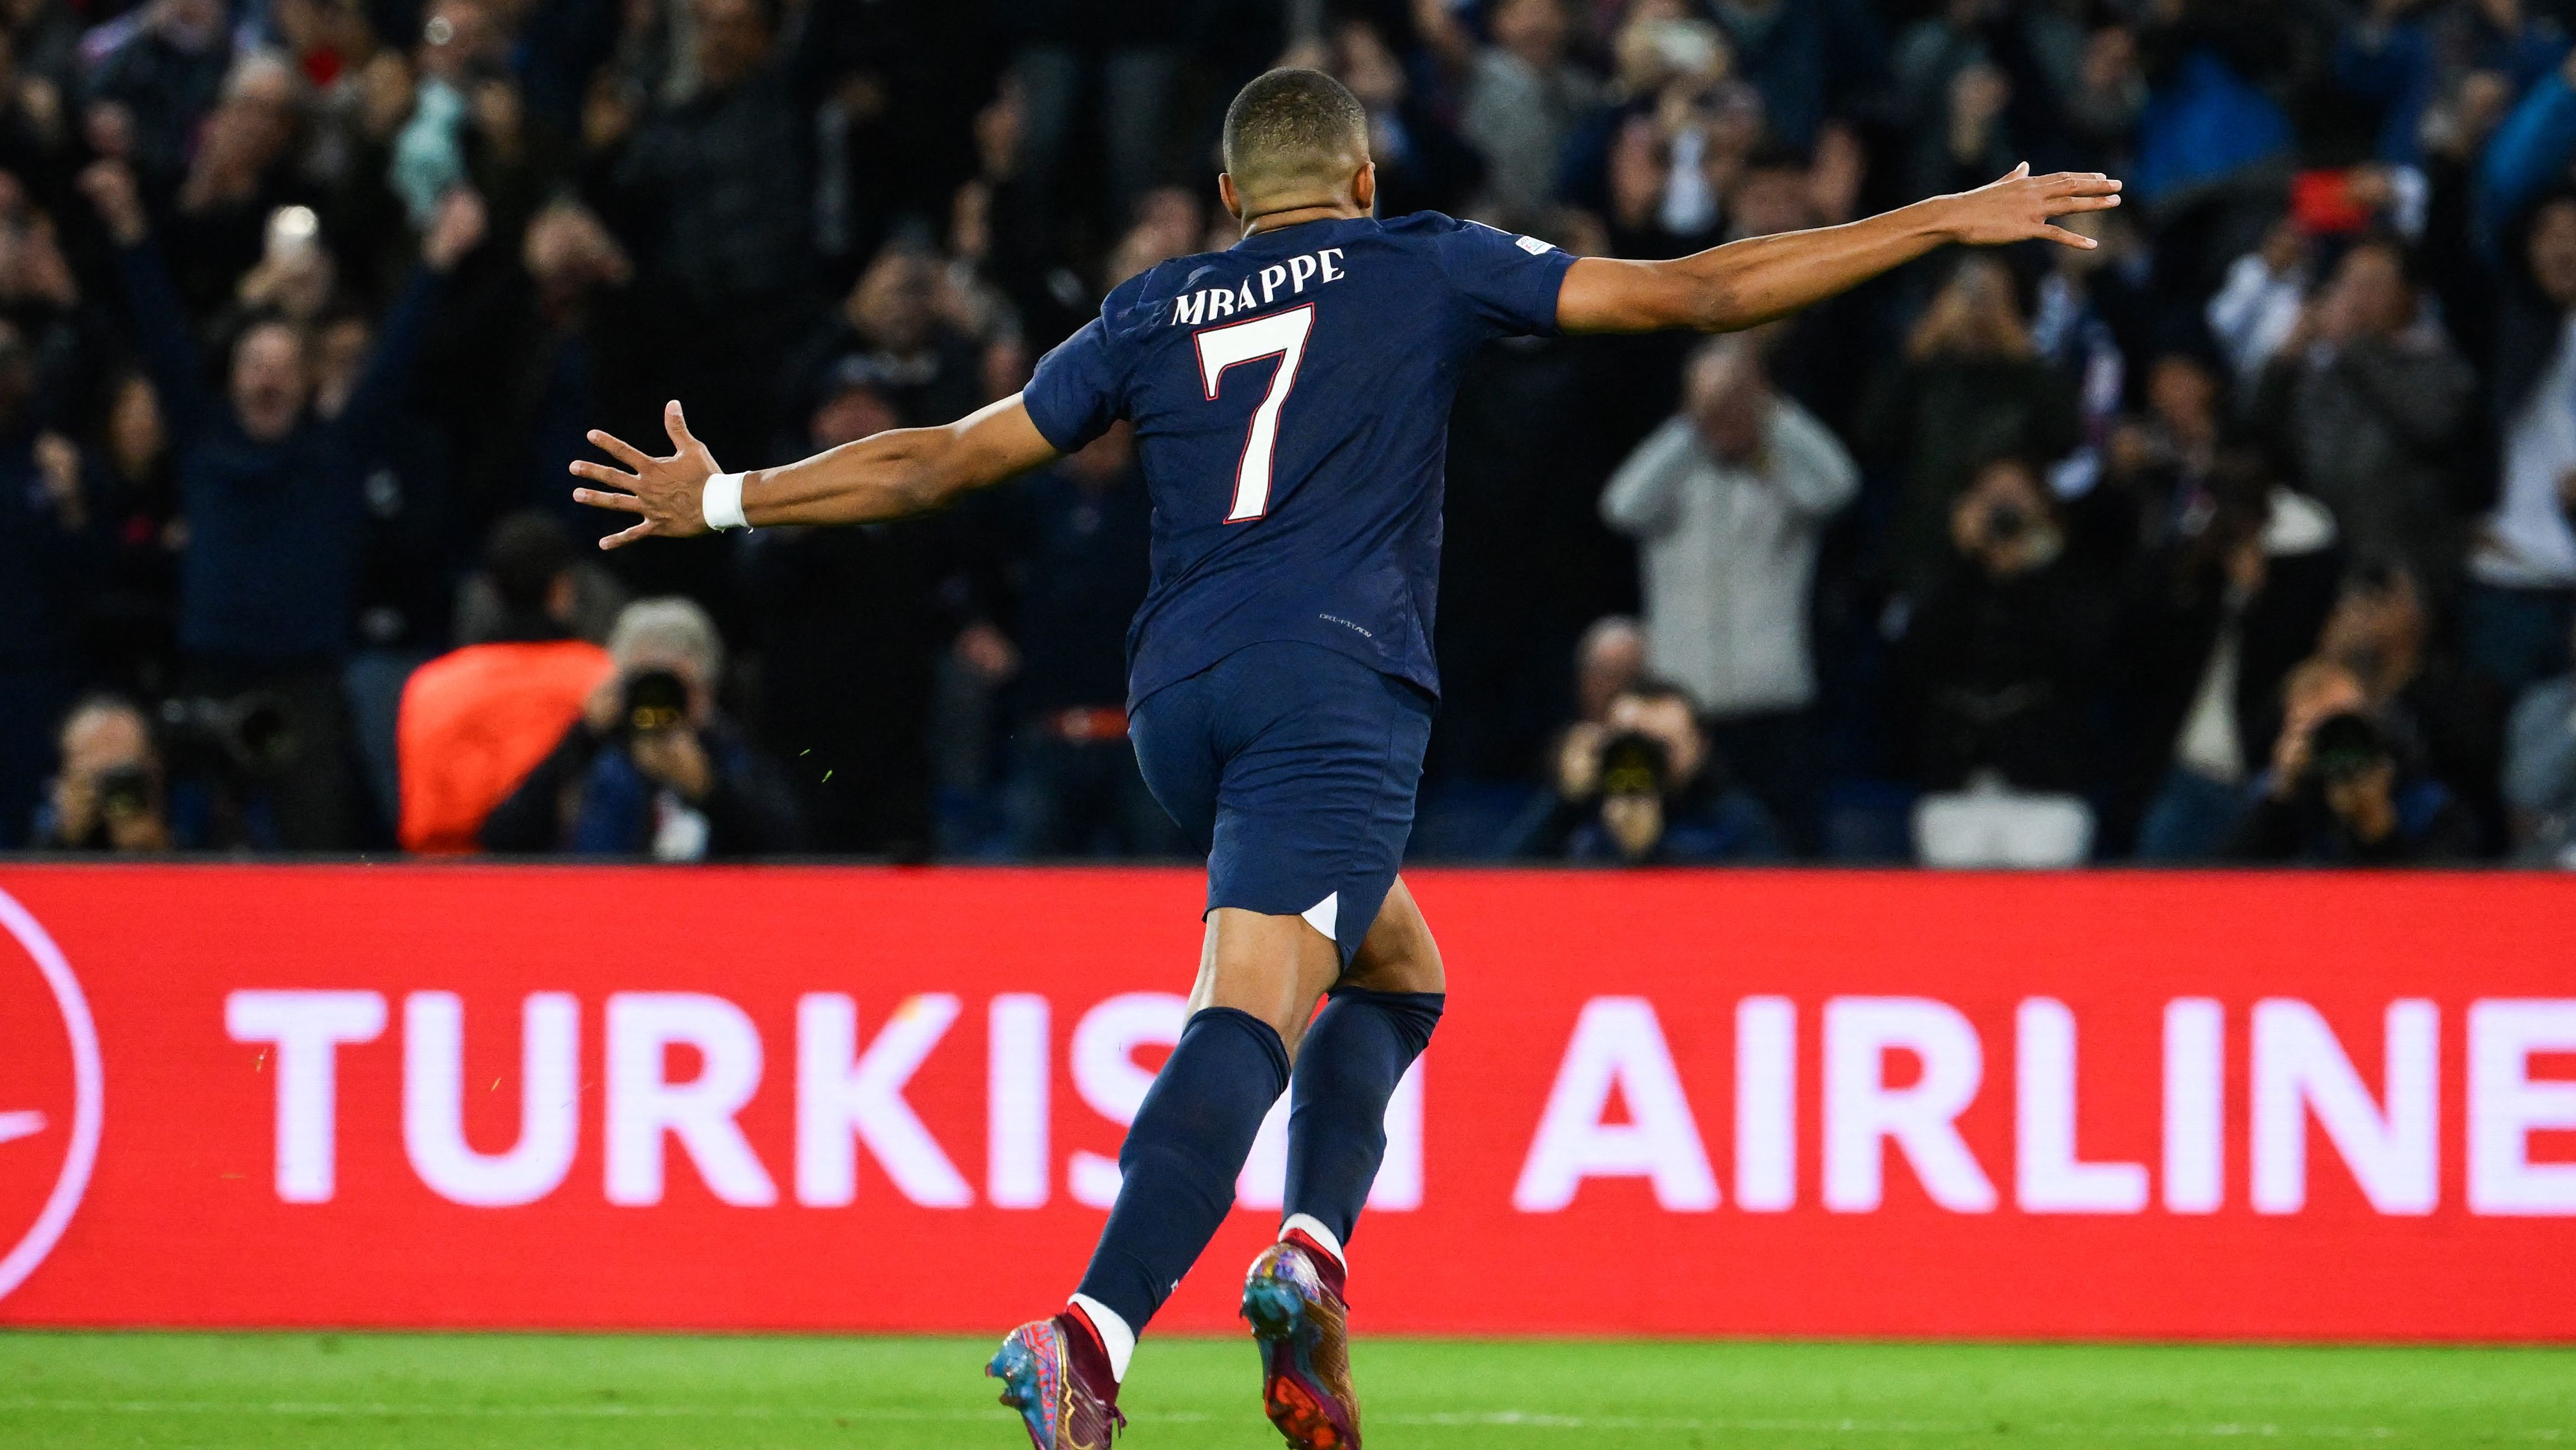 Mbappe celebrates scoring his penalty against Benfica.